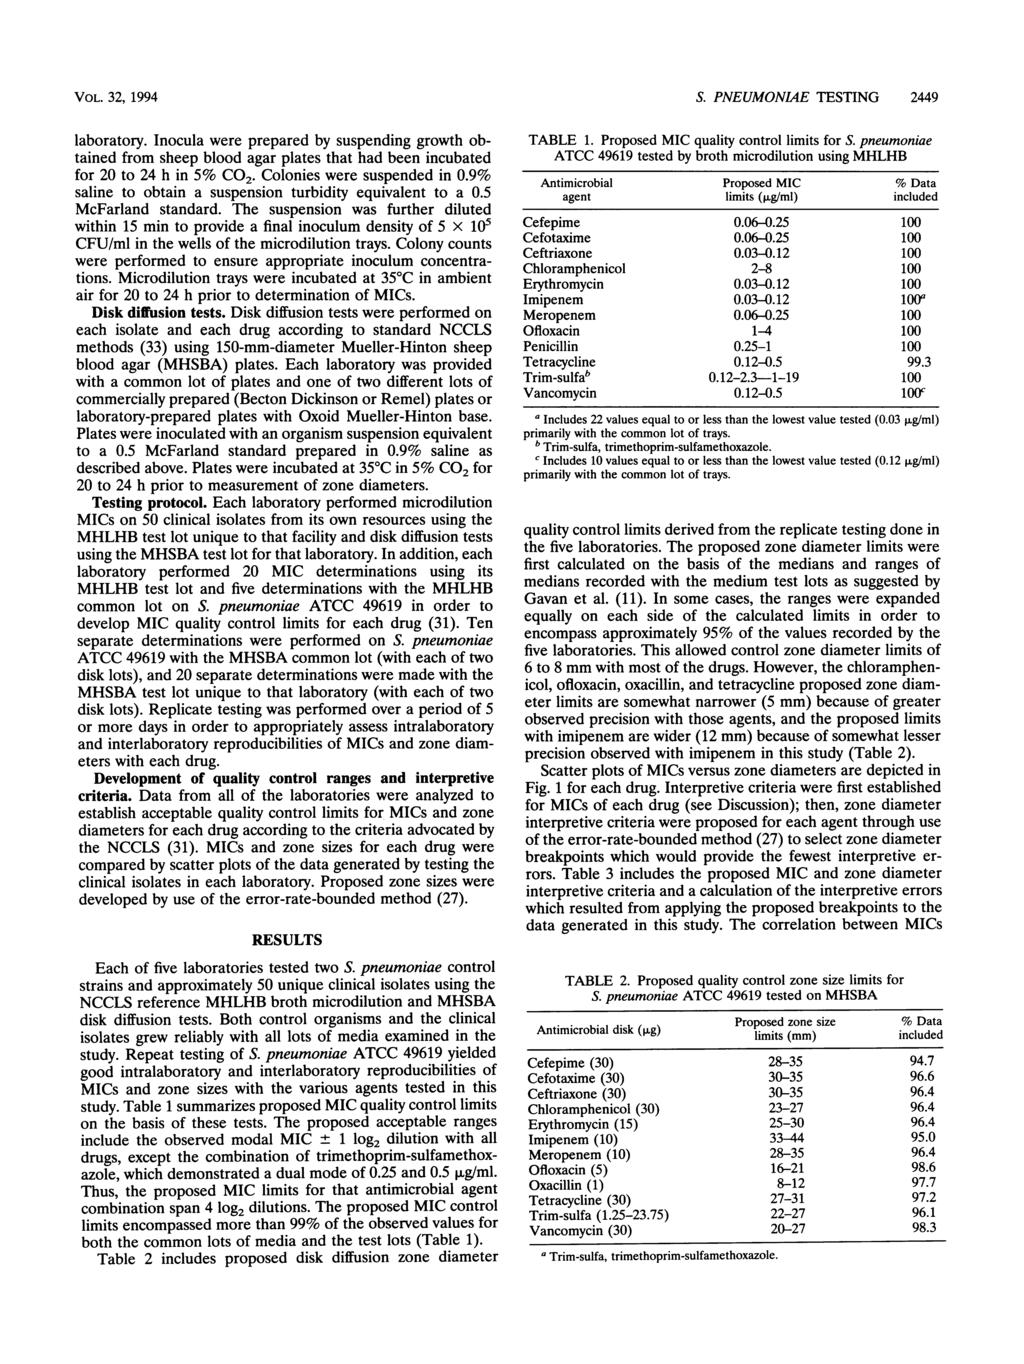 VOL. 3, 199 laboratory. nocula were prepared by suspending growth obtained from sheep blood agar plates that had been incubated for 0 to h in 5% CO. Colonies were suspended in 0.